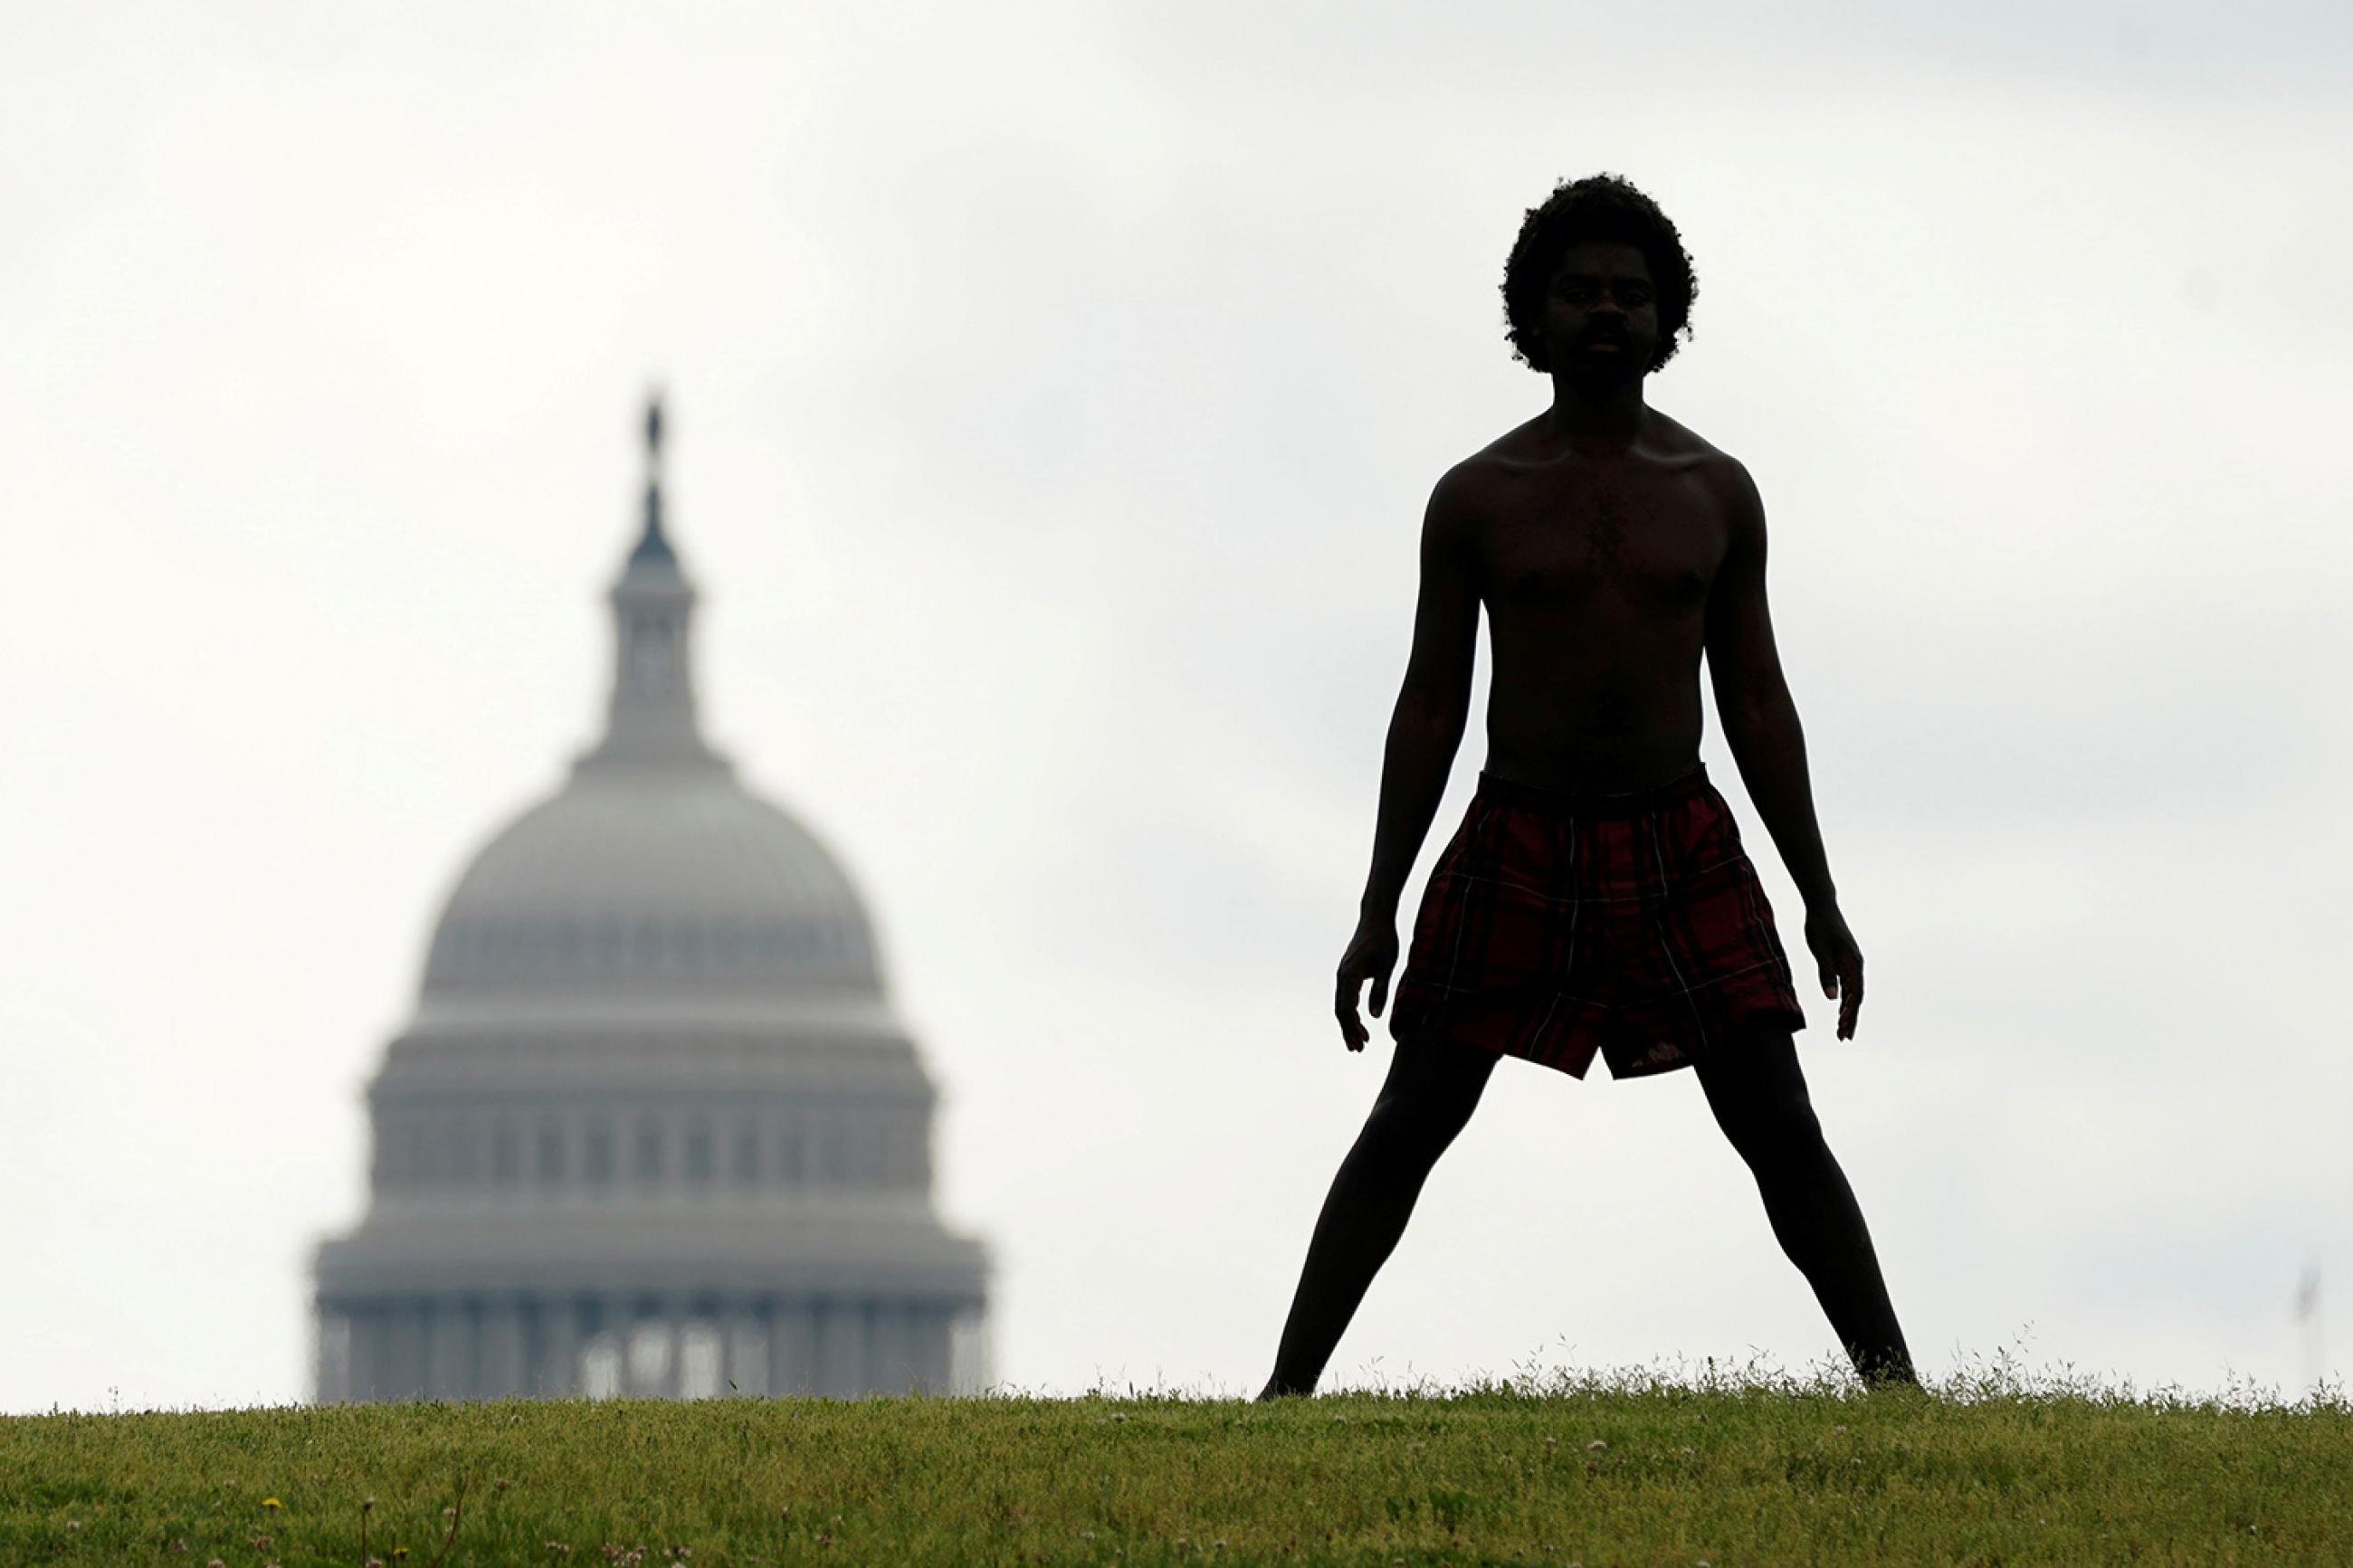 With the dome of the U.S. Capitol in the background, a homeless man named Damu stretches on the National Mall in Washington, U.S., May 27, 2020. The photo is striking, with a man in silhouette standing on a hill with his legs spread wide. in the background slightly to his left is the congressional building. REUTERS/Kevin Lamarque 